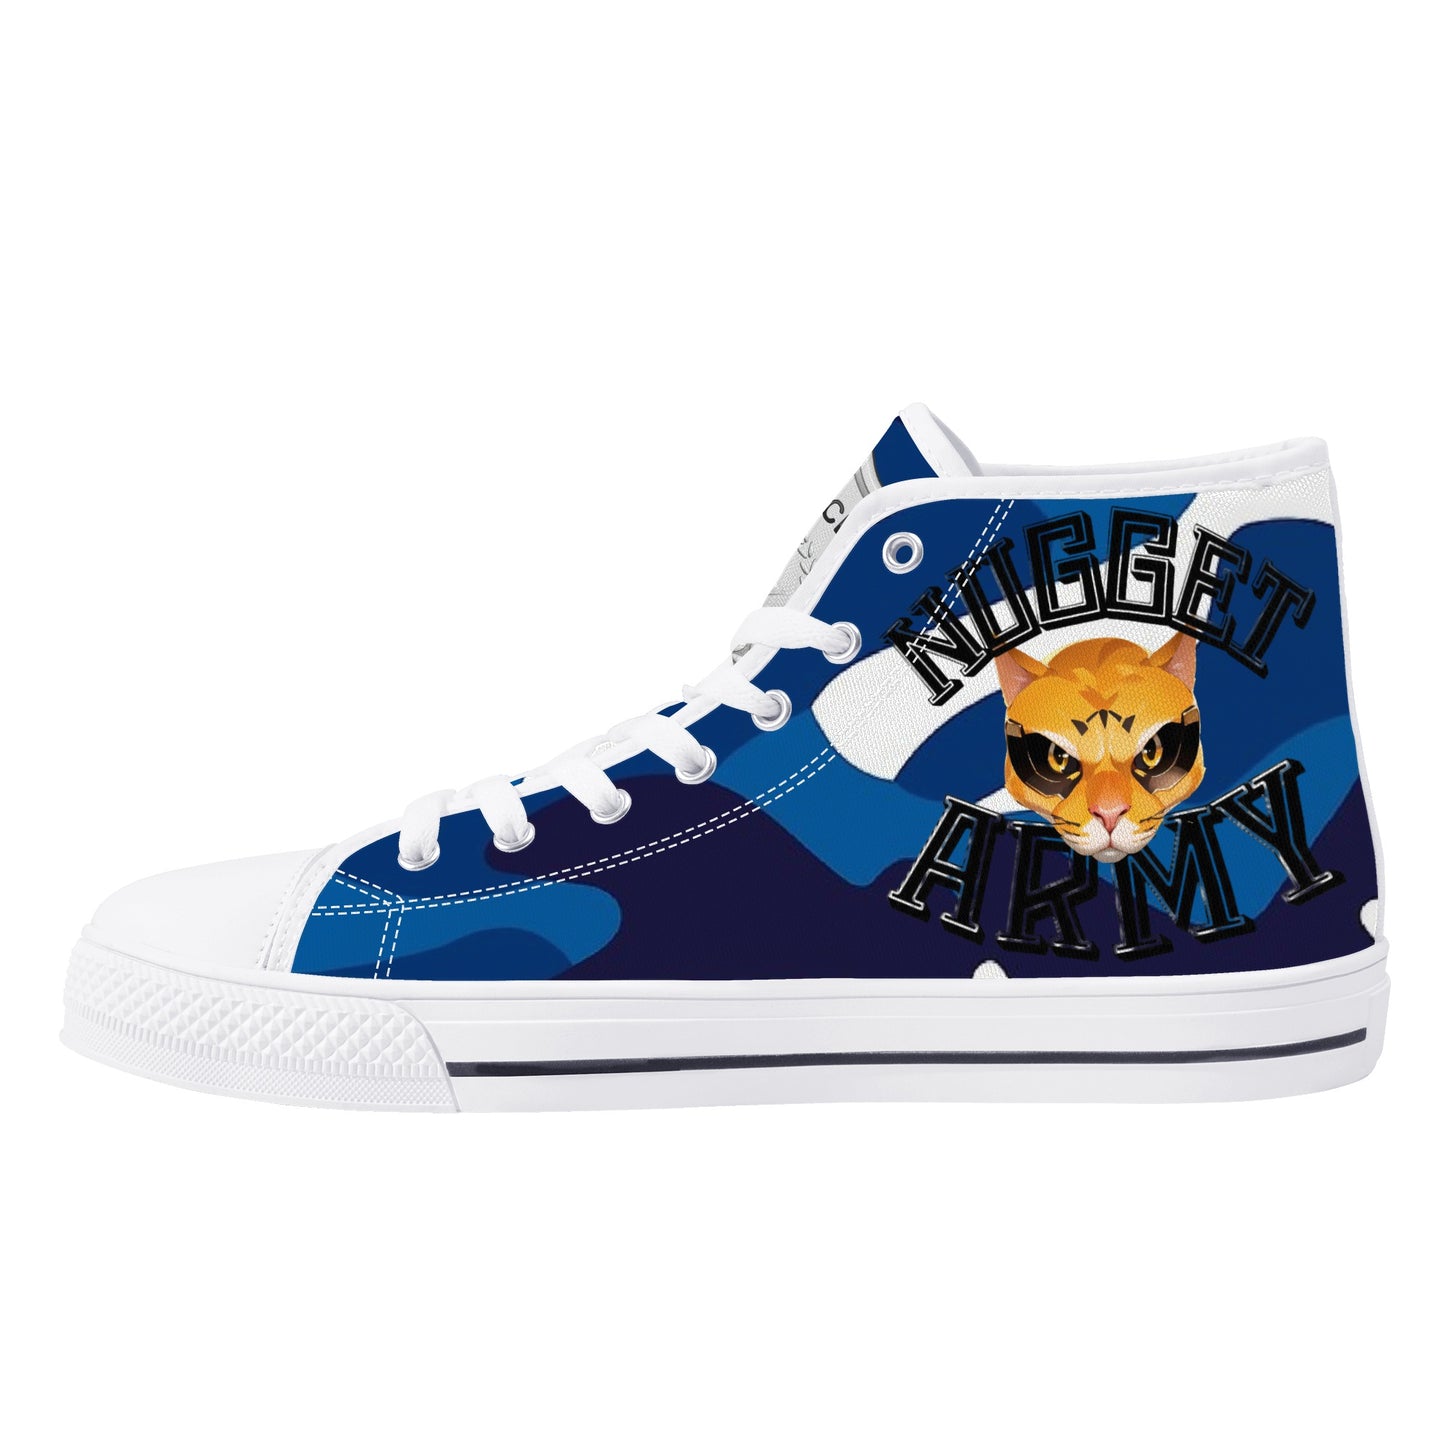 Stand out  with the  Nugget Army Poliec Womens High Top Canvas Shoes  available at Hey Nugget. Grab yours today!